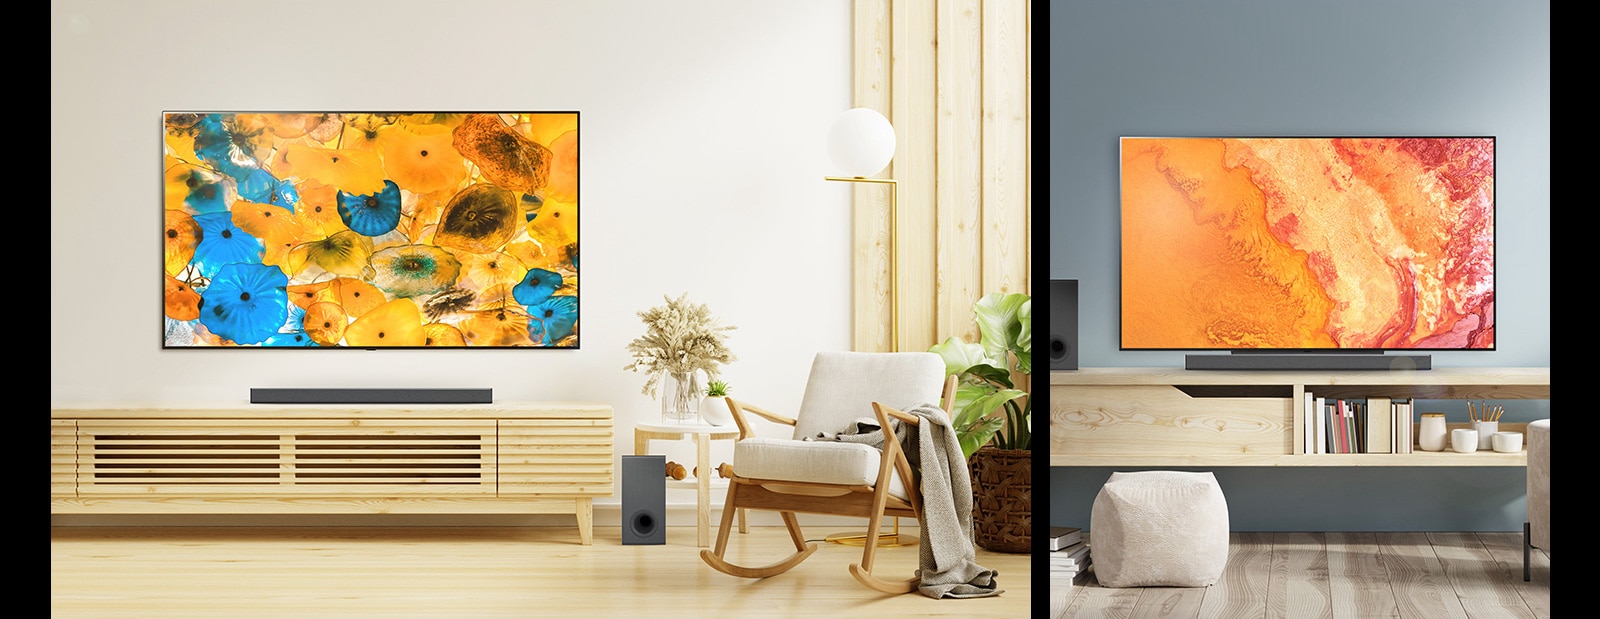 An image of LG OLED B3 with a Floor Stand in front of a window overlooking the city. LG OLED B3 on the wall of a modern room. The bottom corner of LG OLED B3's base.